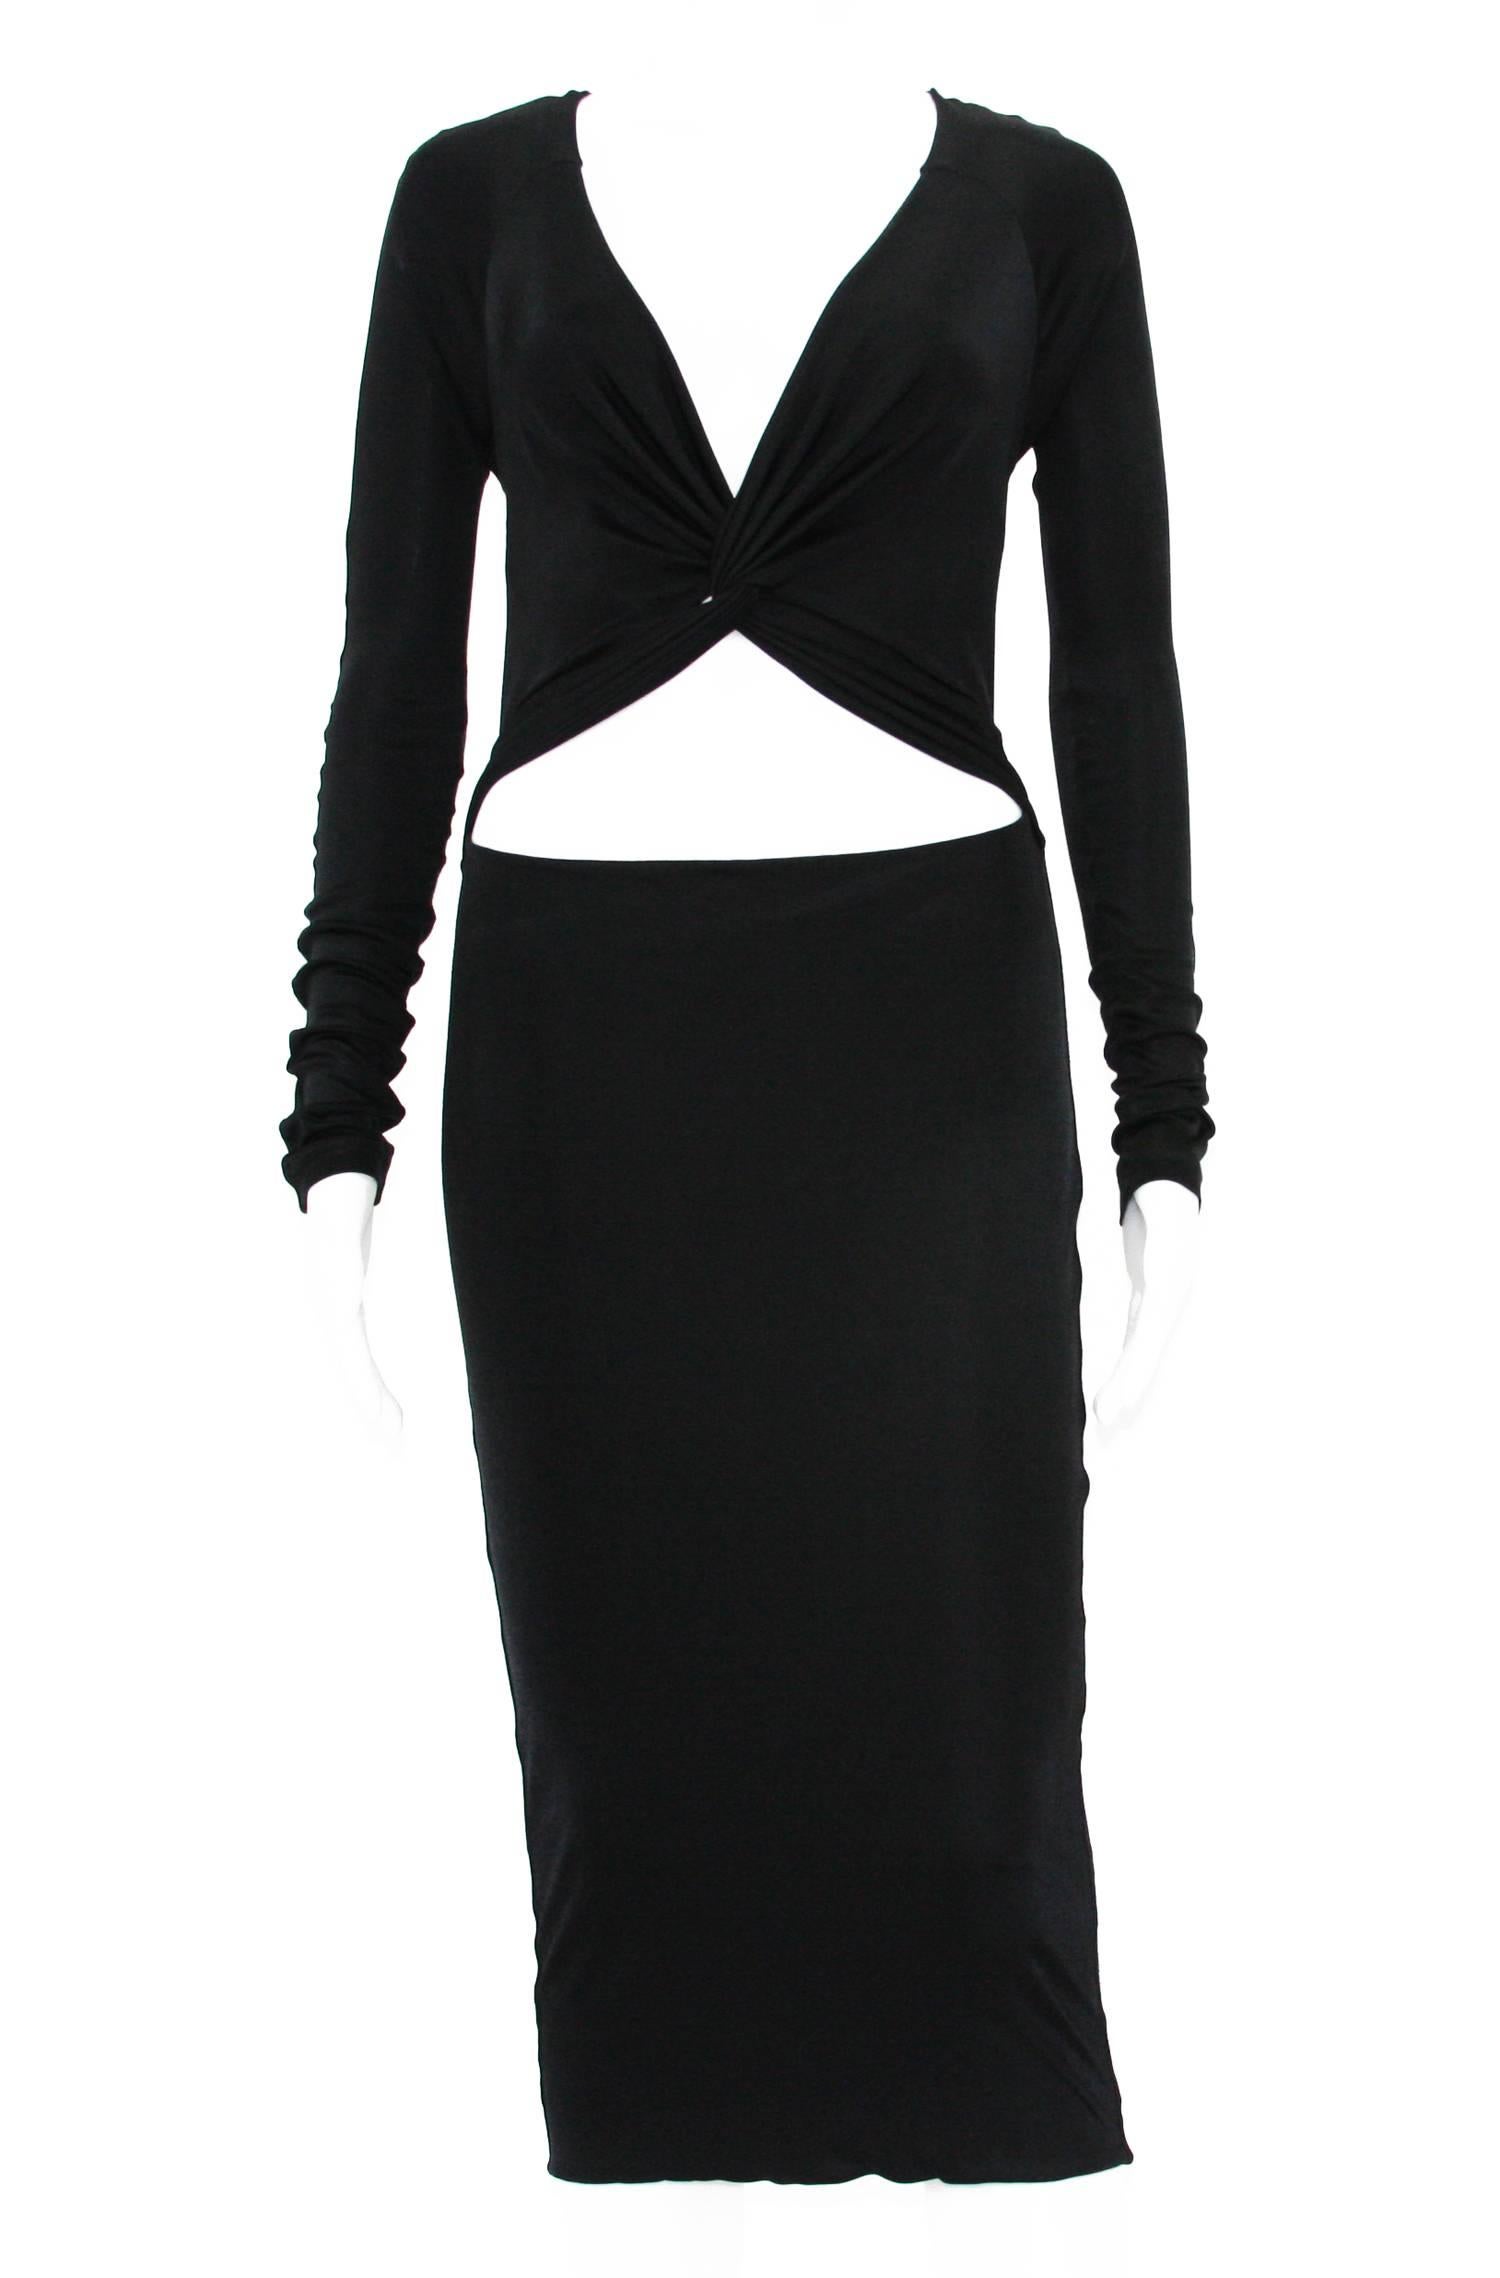 Tom Ford for Gucci 90's Sexy Cut Out Cocktail Dress
Designer size M
Black Stretch Jersey
Double Layered Skirt
Simple Slip On
Made in Italy
Excellent Condition